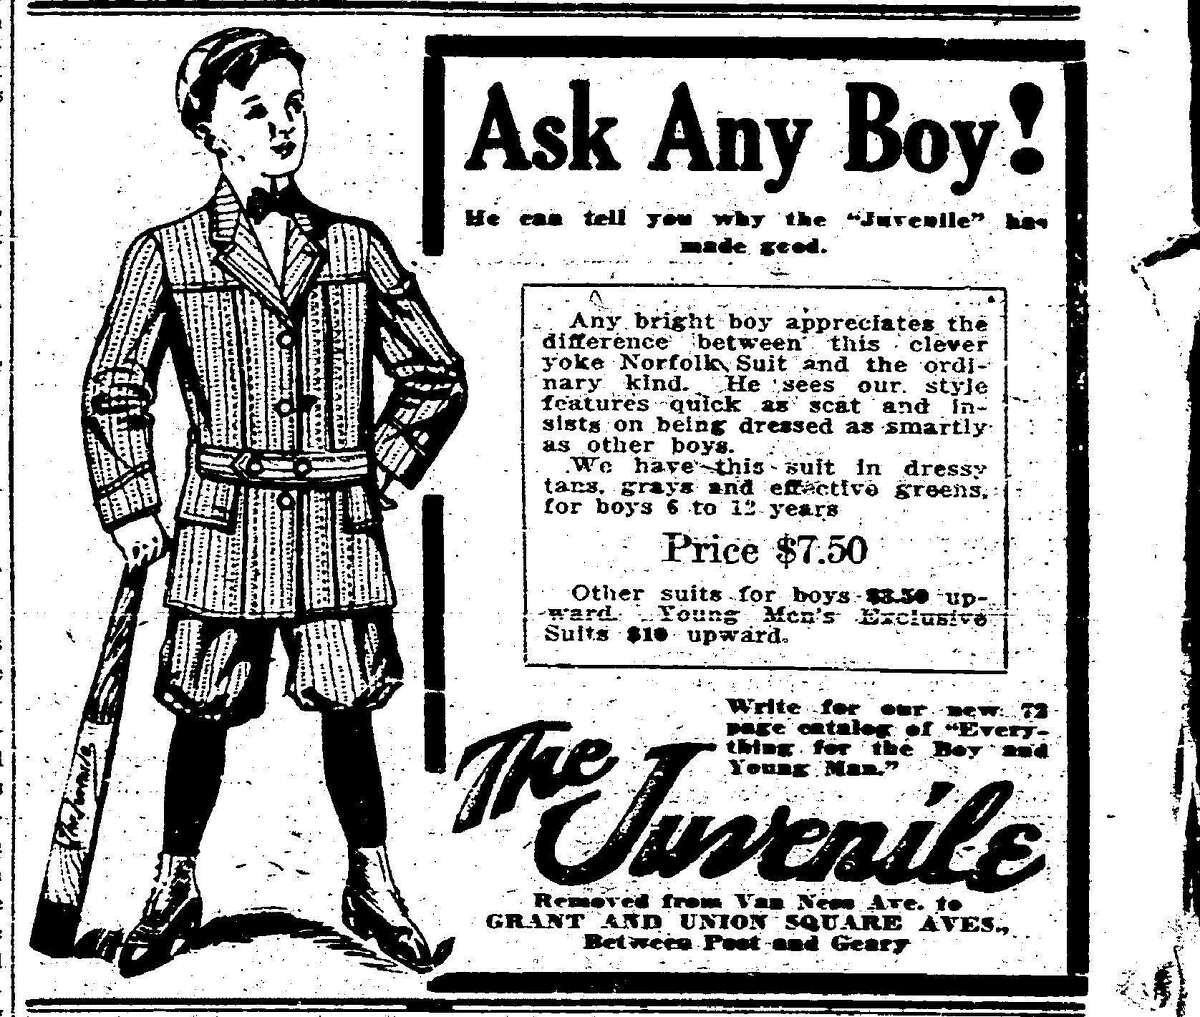 Display ads from the 1900s